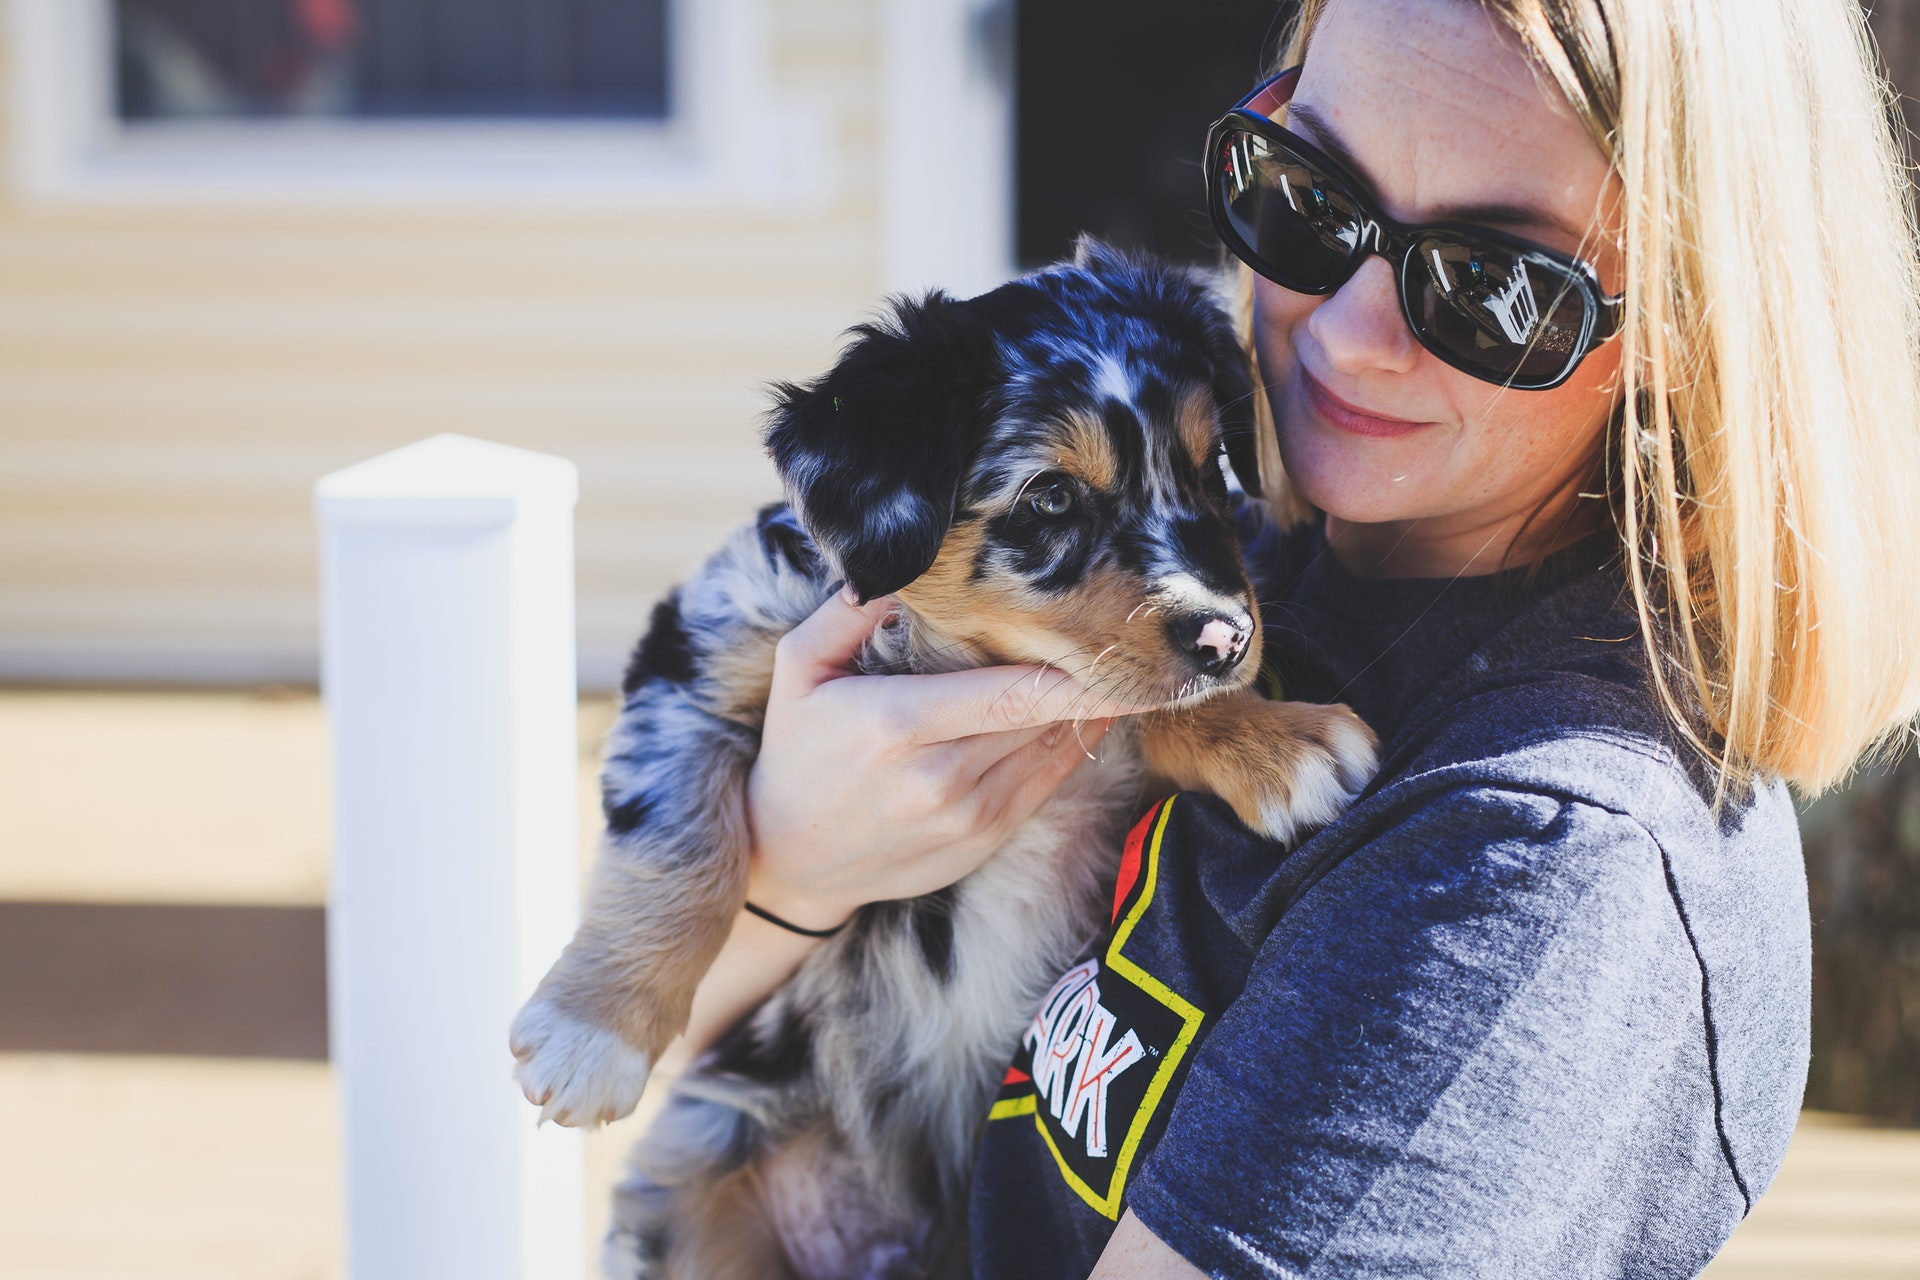 Woman holding a dog, showing how to bond with a new rescue dog